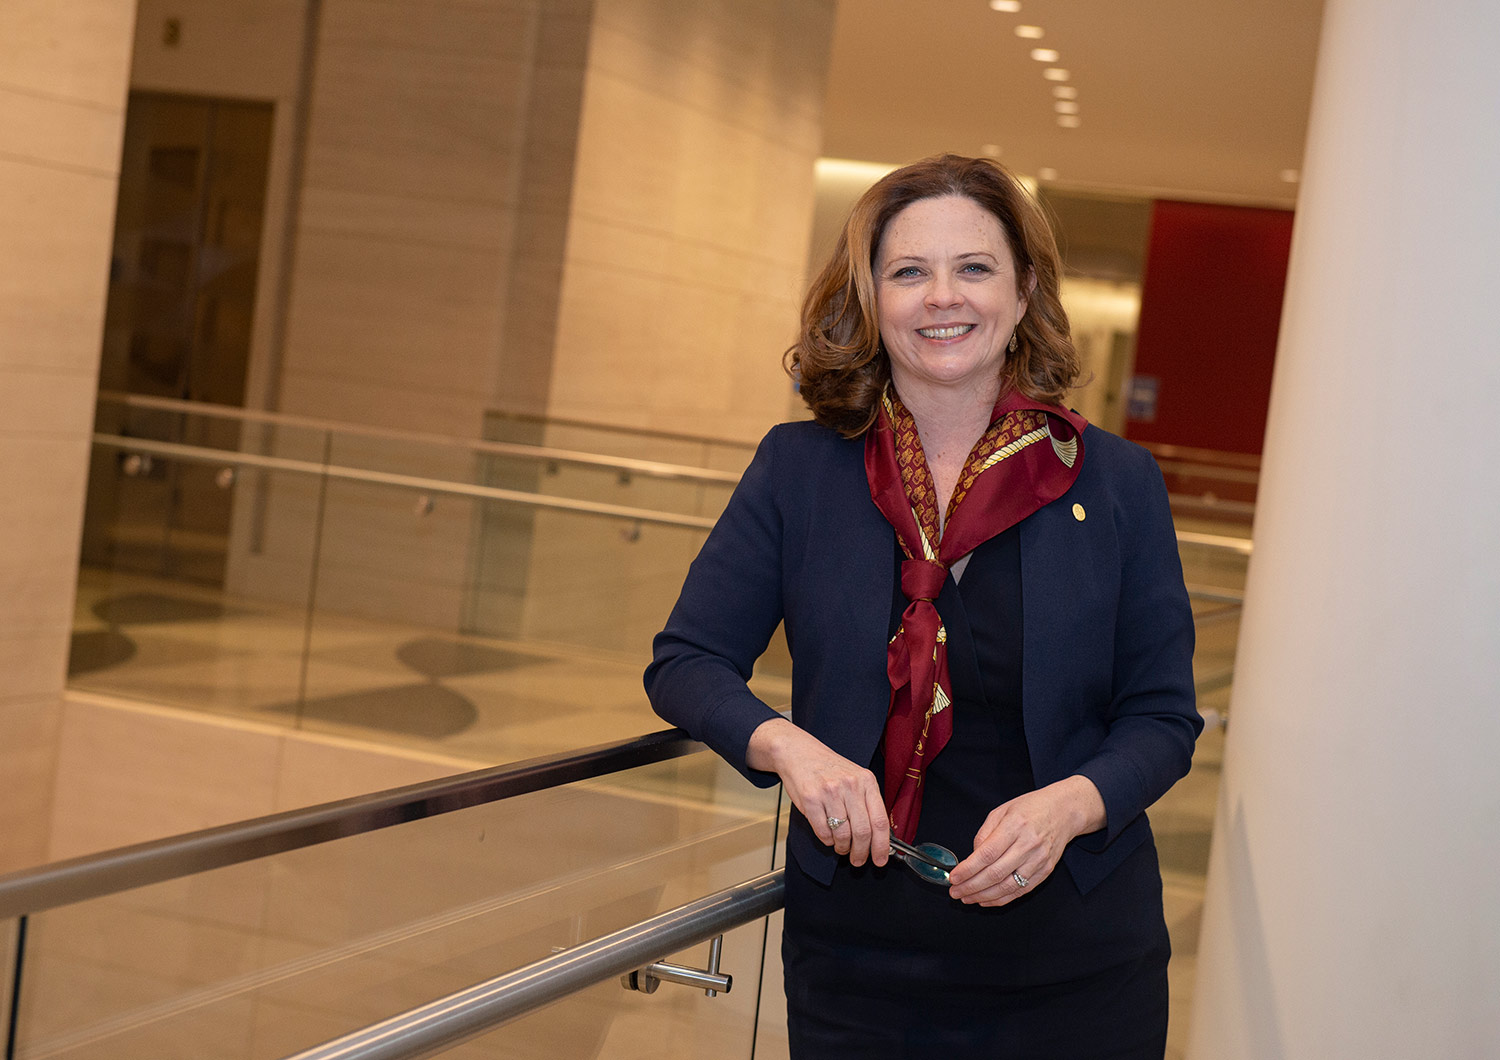 A landscape photograph perspective of Tania Tetlow (Fordham University's 33rd President) smiling as she poses for a picture